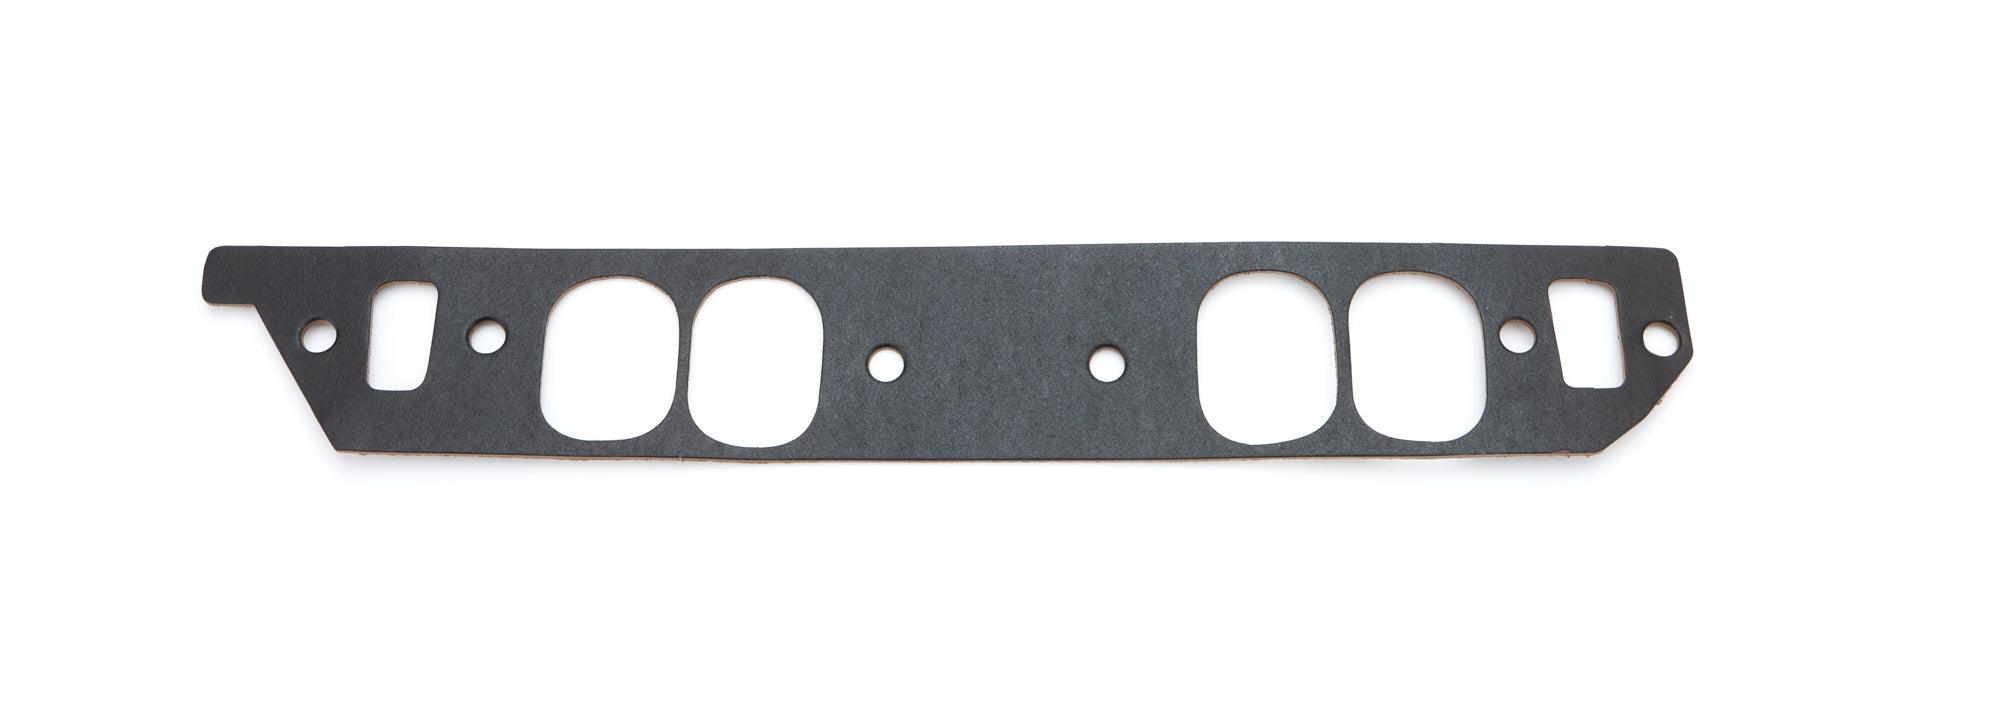 BBC Intake Gasket .120in Thick 1pk - Burlile Performance Products